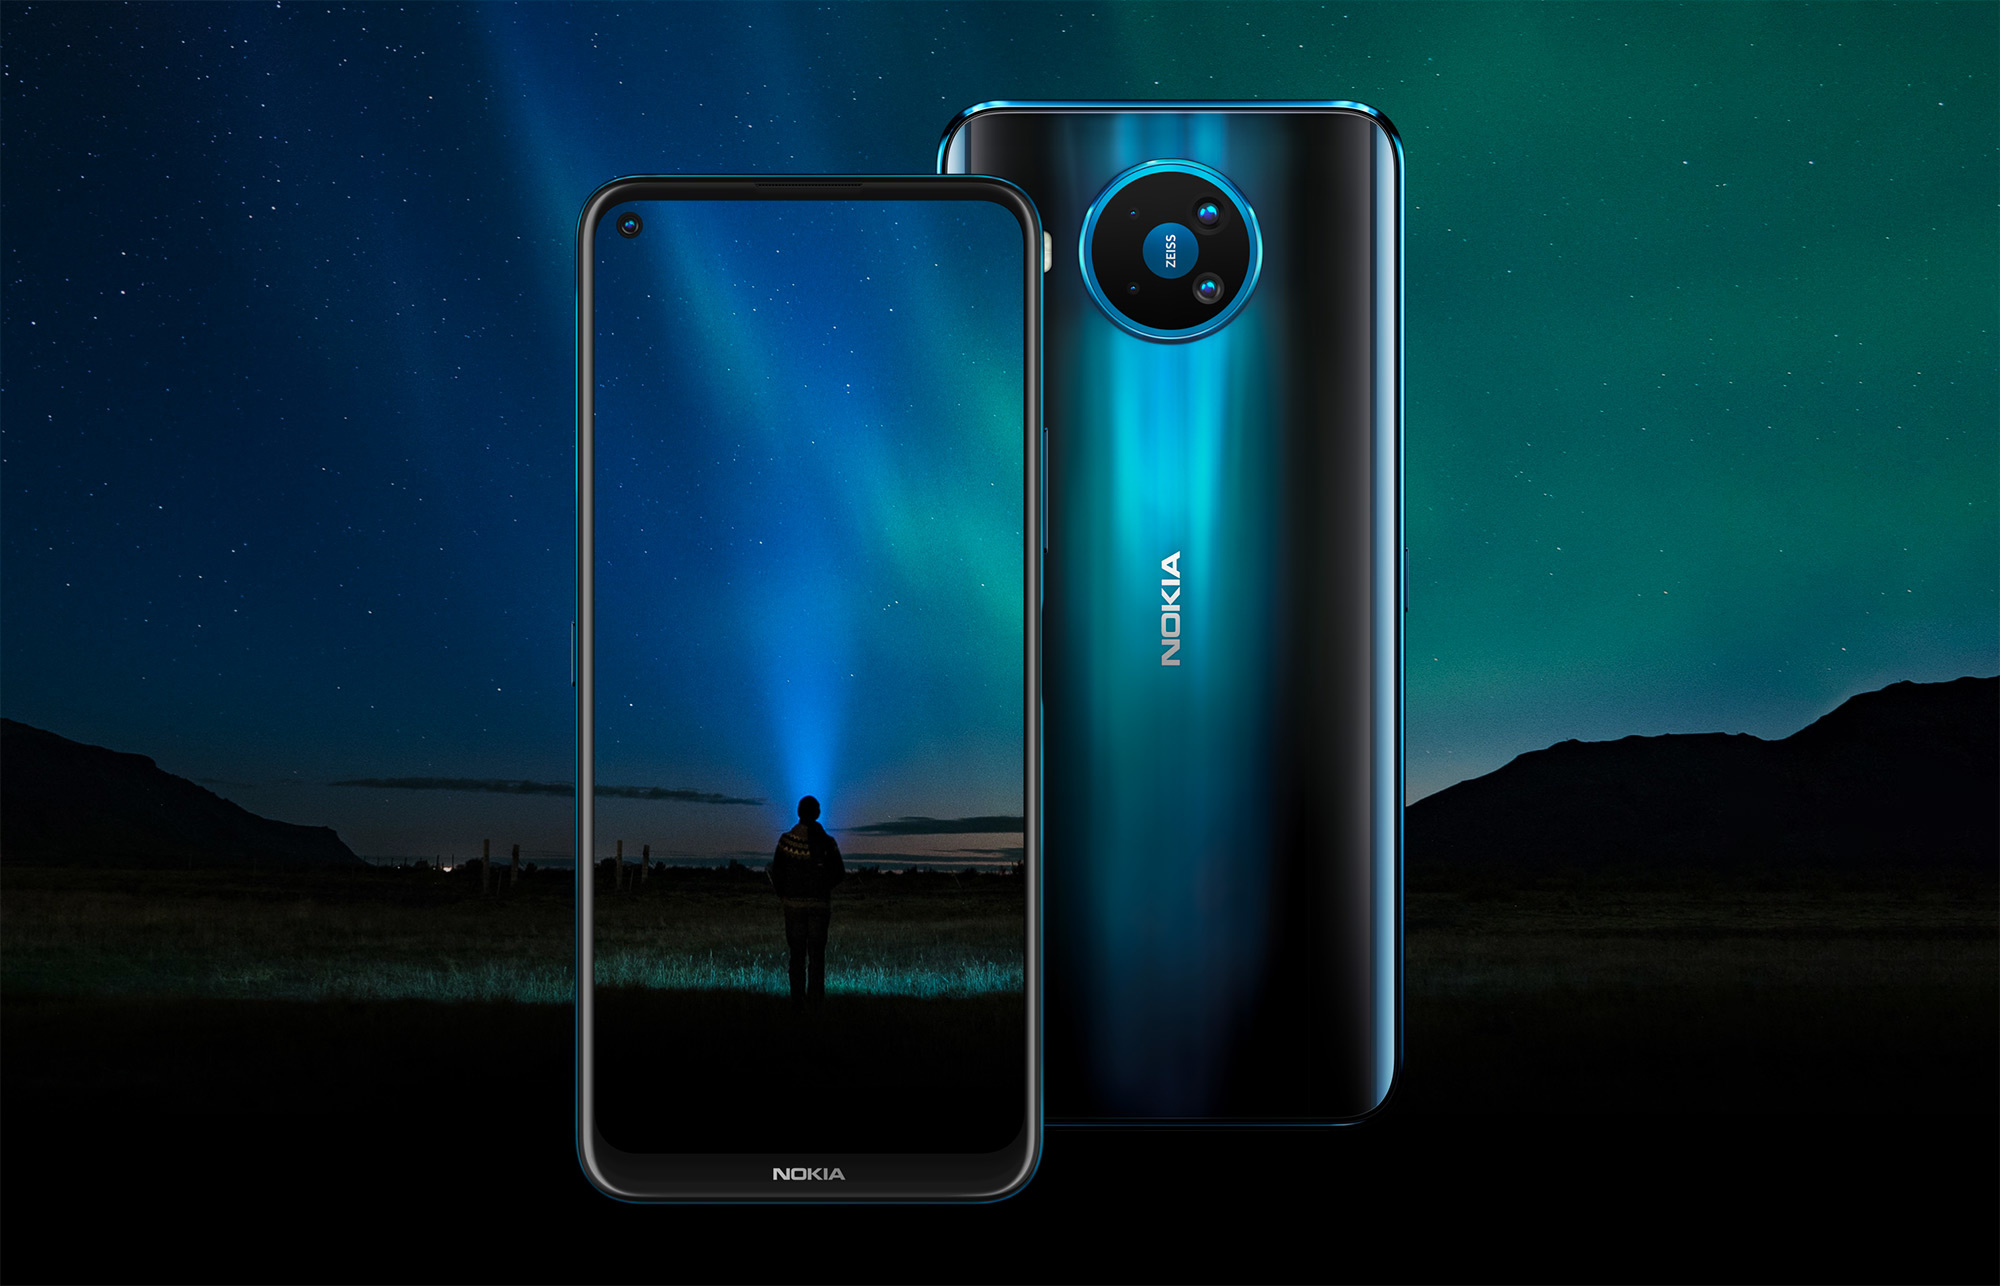 For Verizon, Nokia’s first large HMD-made phone in the US is an 8.3 5G